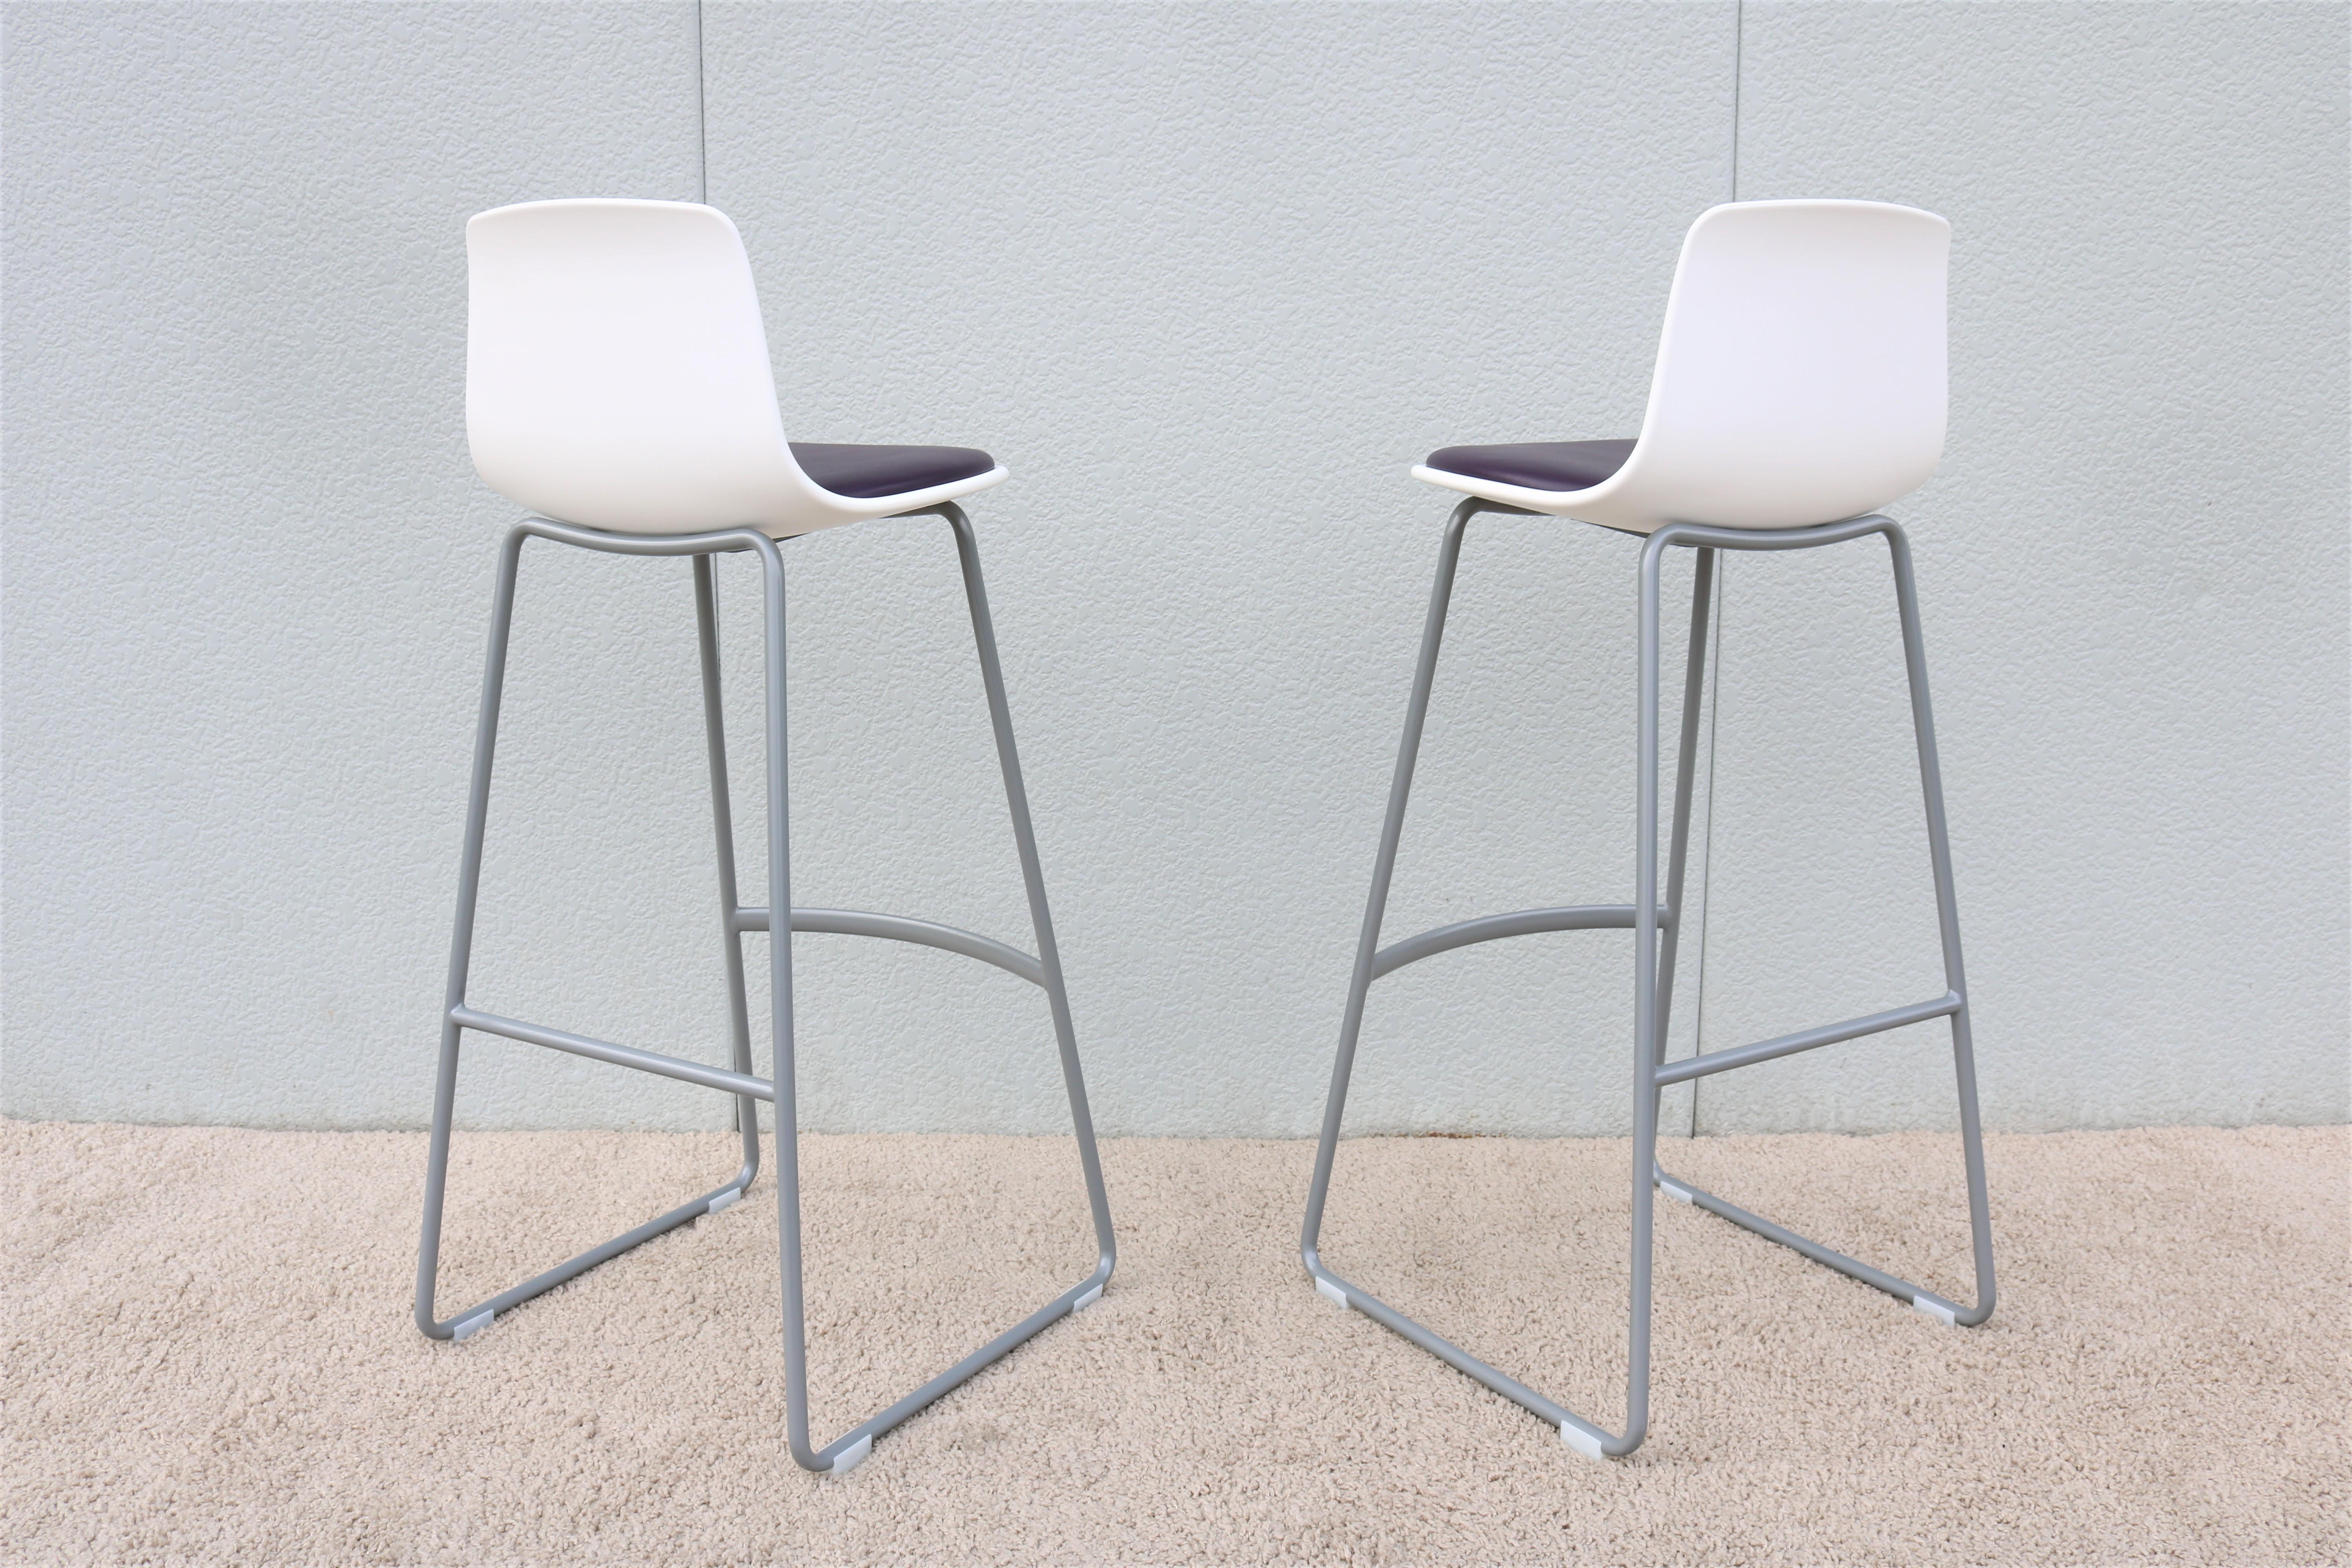 American Modern Lievore Altherr Molina for Coalesse Enea Lottus Bar Stools New, a Pair For Sale